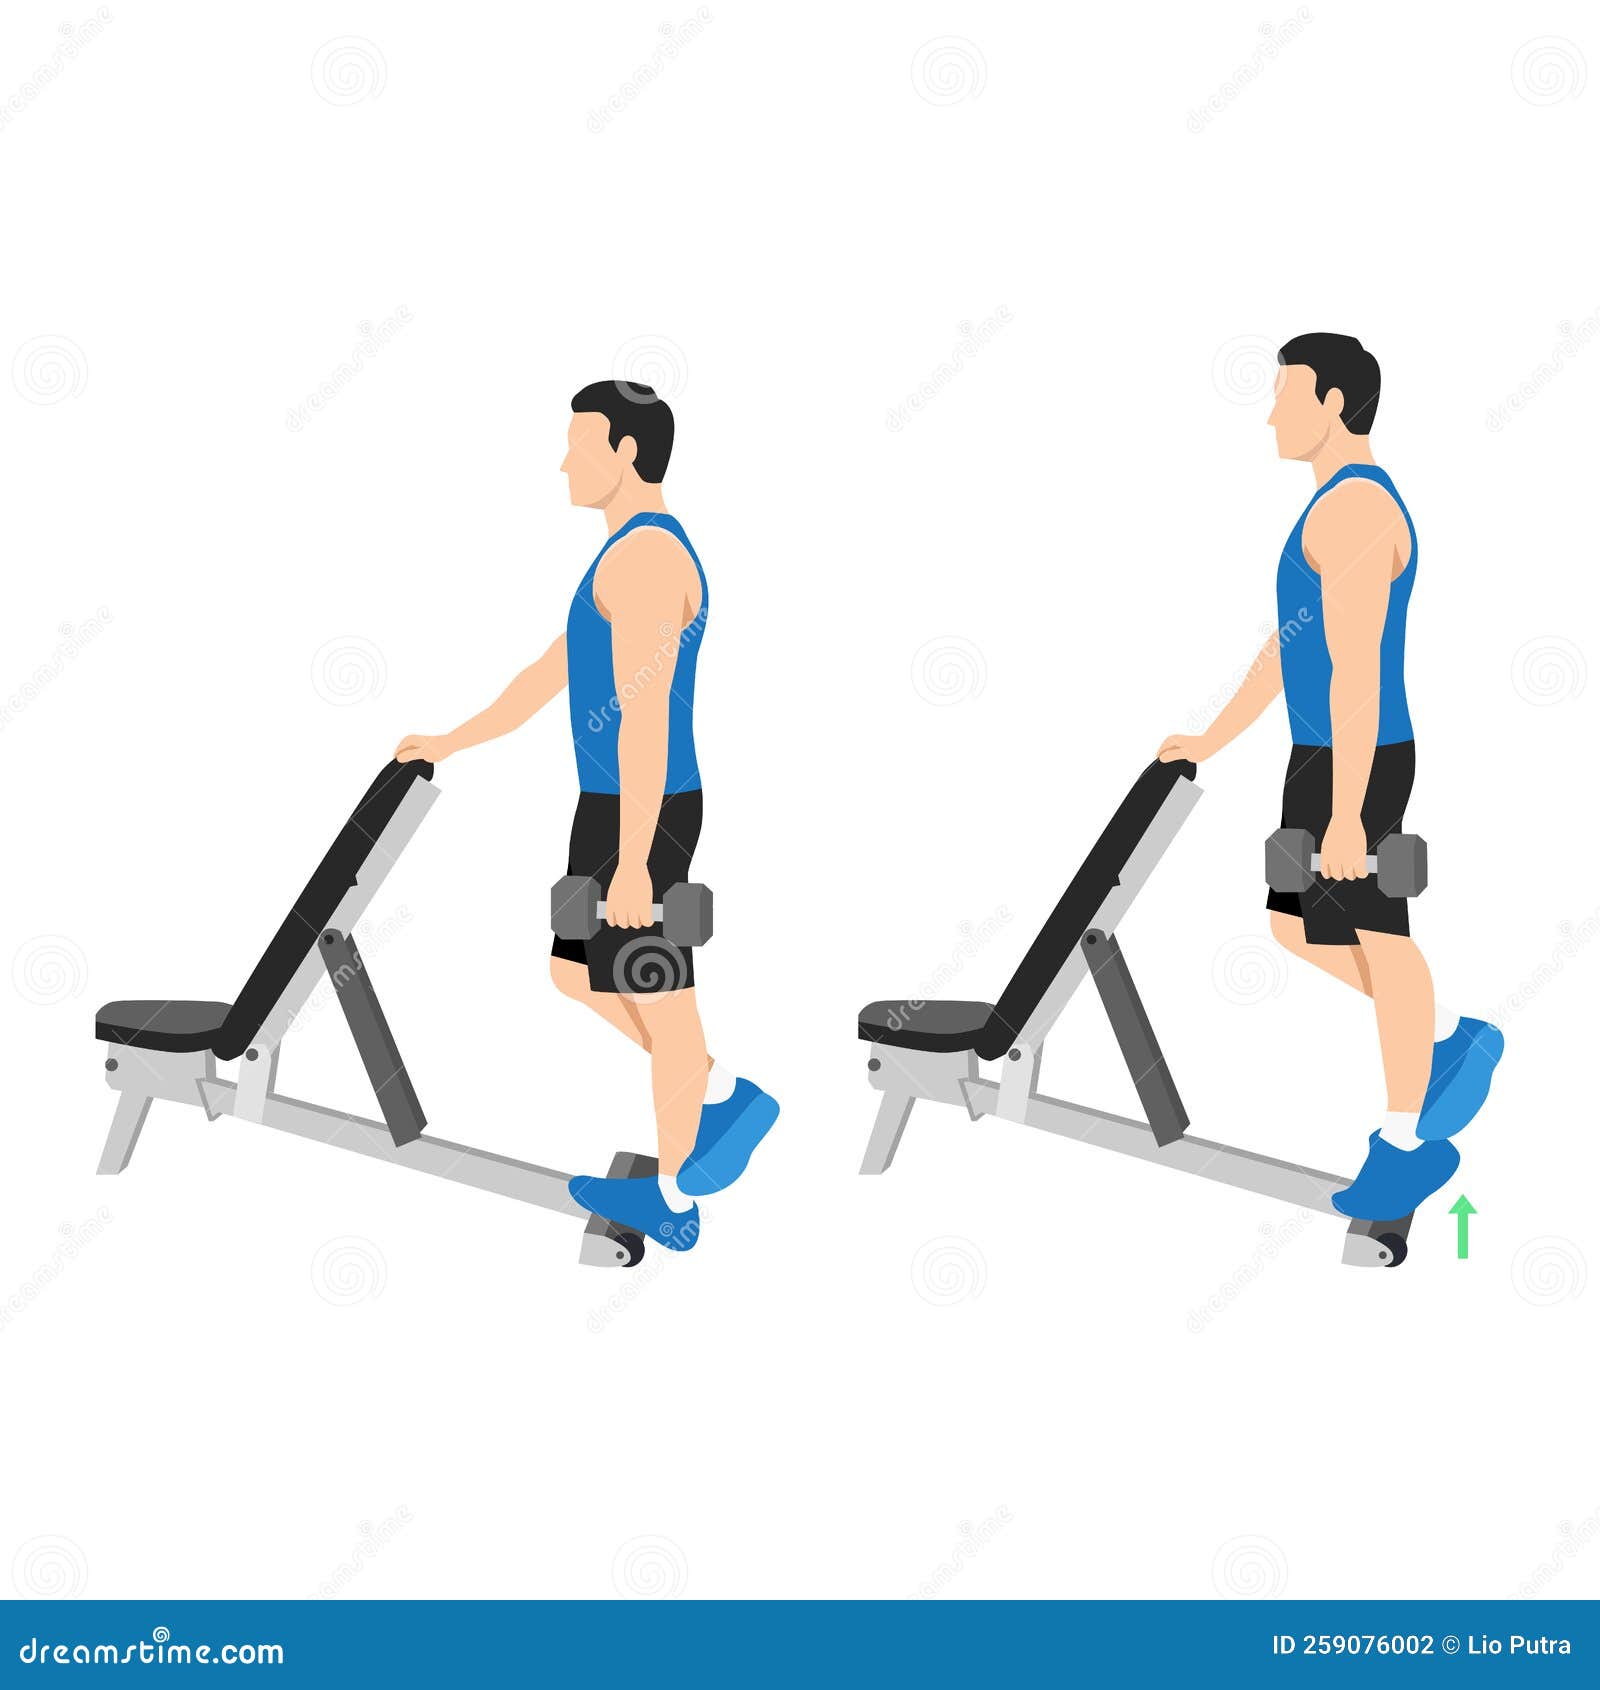 man doing standing calf raise with dumbbell exercise.